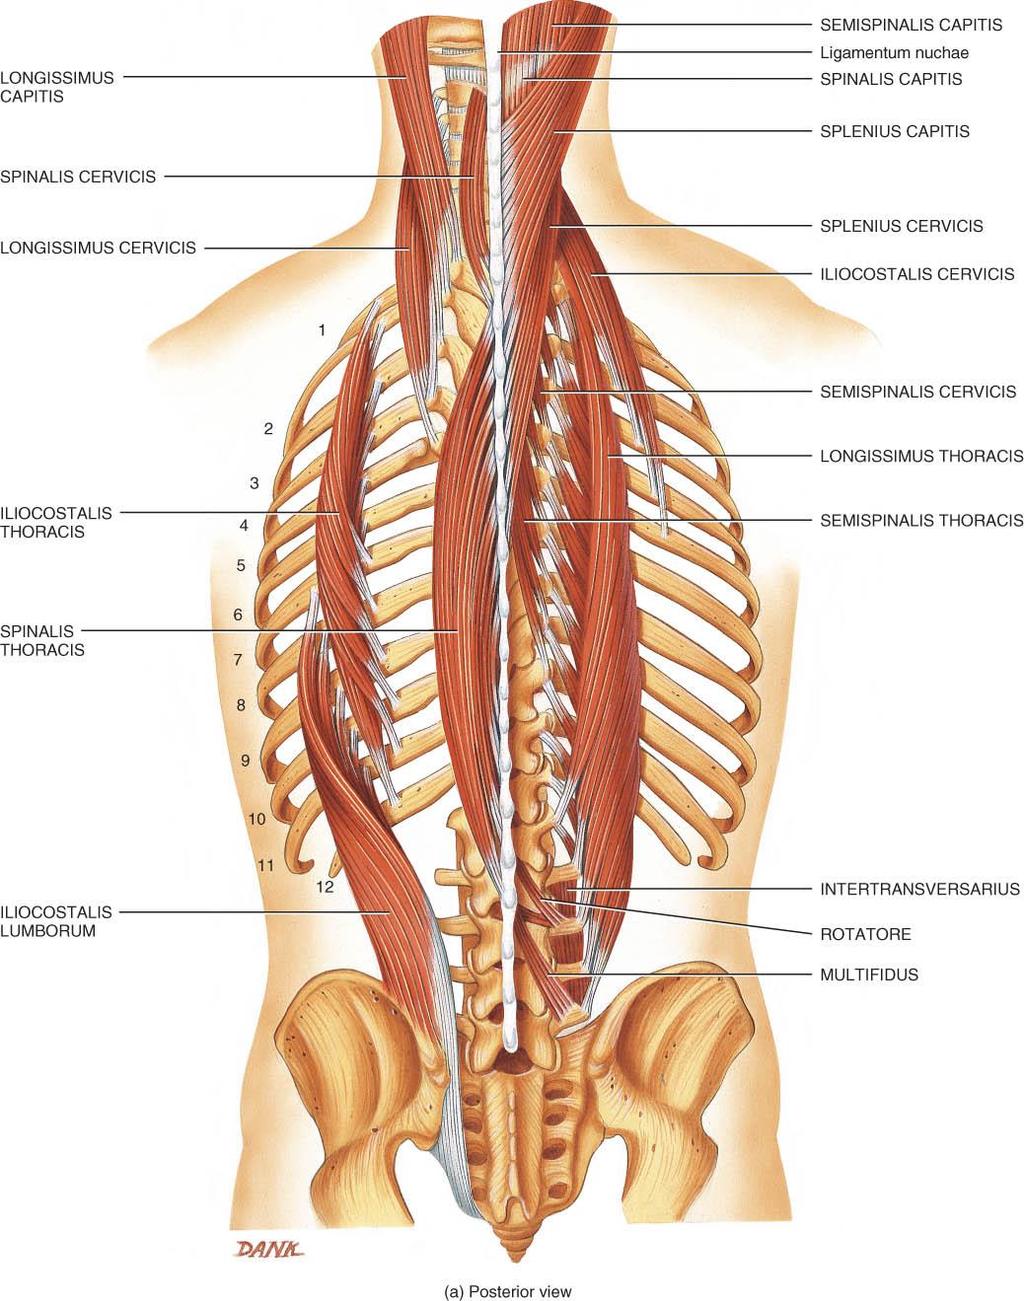 Non-examinable MUSCLES THAT MOVE THE VERTEBRAE o o o Quite complex due to overlap Erector spinae fibers run longitudinally 3 groupings spinalis iliocostalis longissimus extend